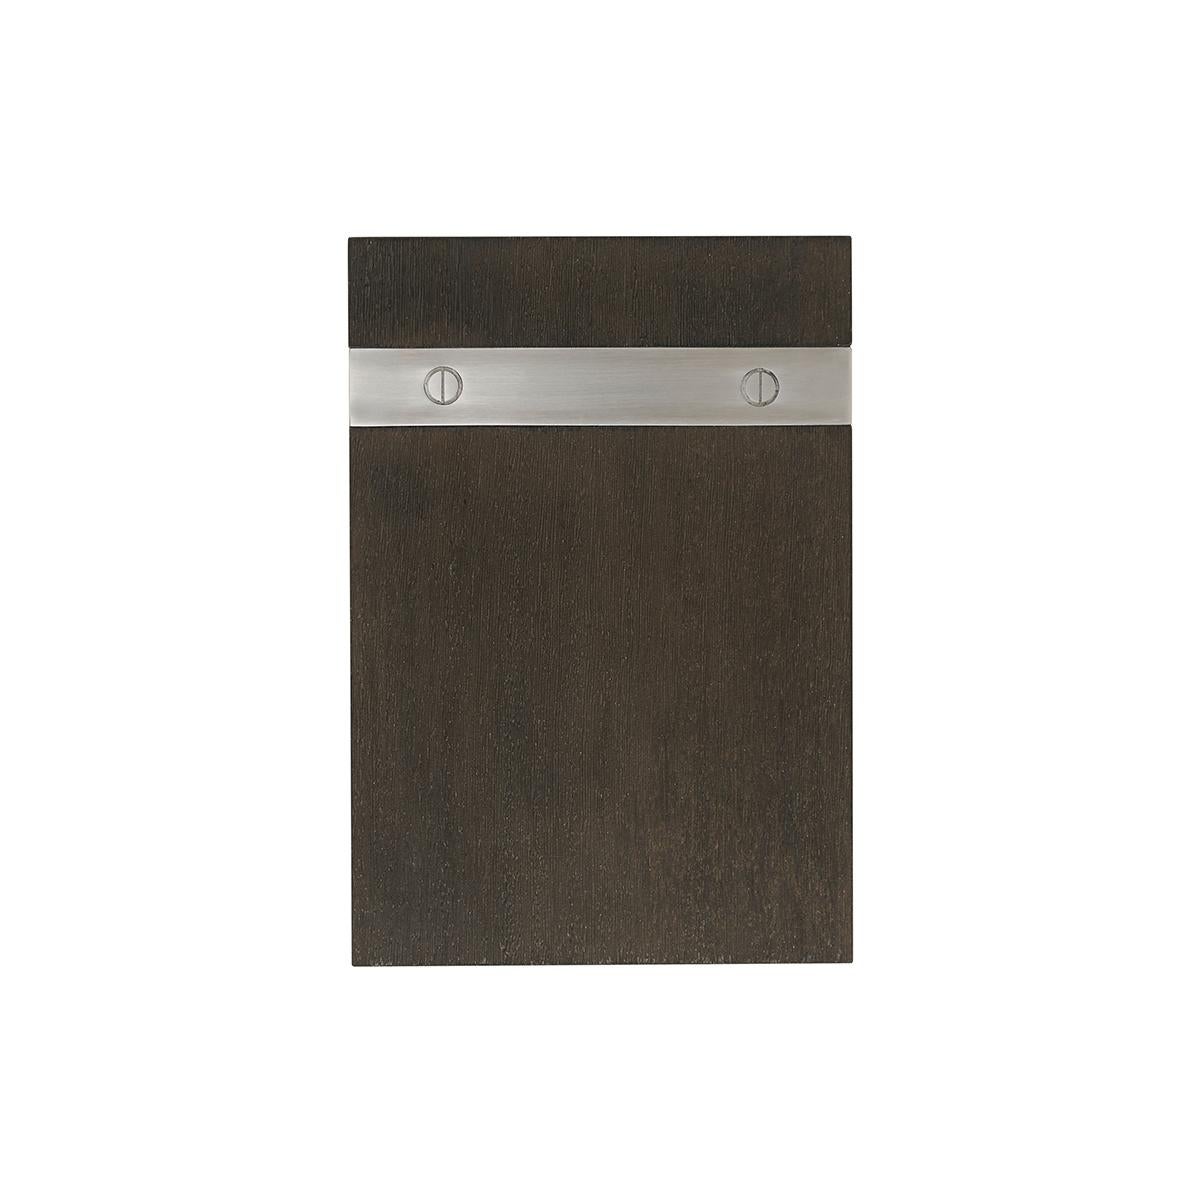 The simple modern cantilever design with a dark anise finish to the Lati veneered top, with a brushed nickel finish metal support and with industrial modern slot screw accents.

Dimensions: 10